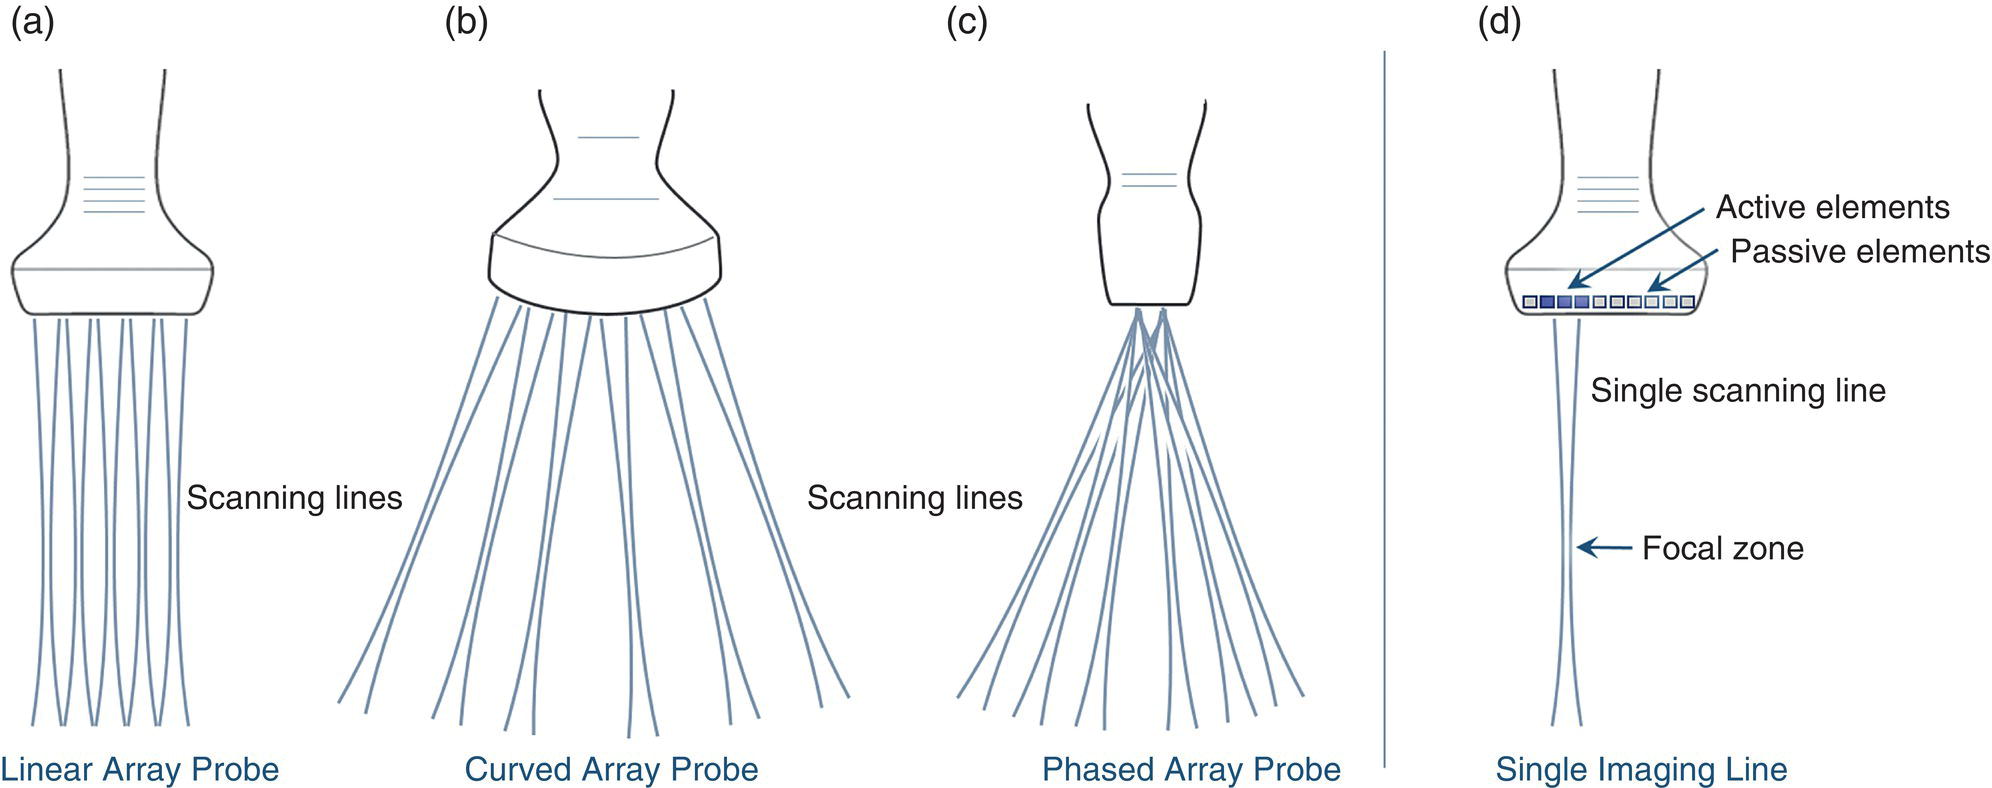 Four schematic diagrams. a. Linear array probe with five scanning lines in vertical form. b. Curved array probe with six scanning lines in scattered form. c. phased array probe with six scanning lines. d. Single imaging line containing active elements, passive elements, and focal zone.